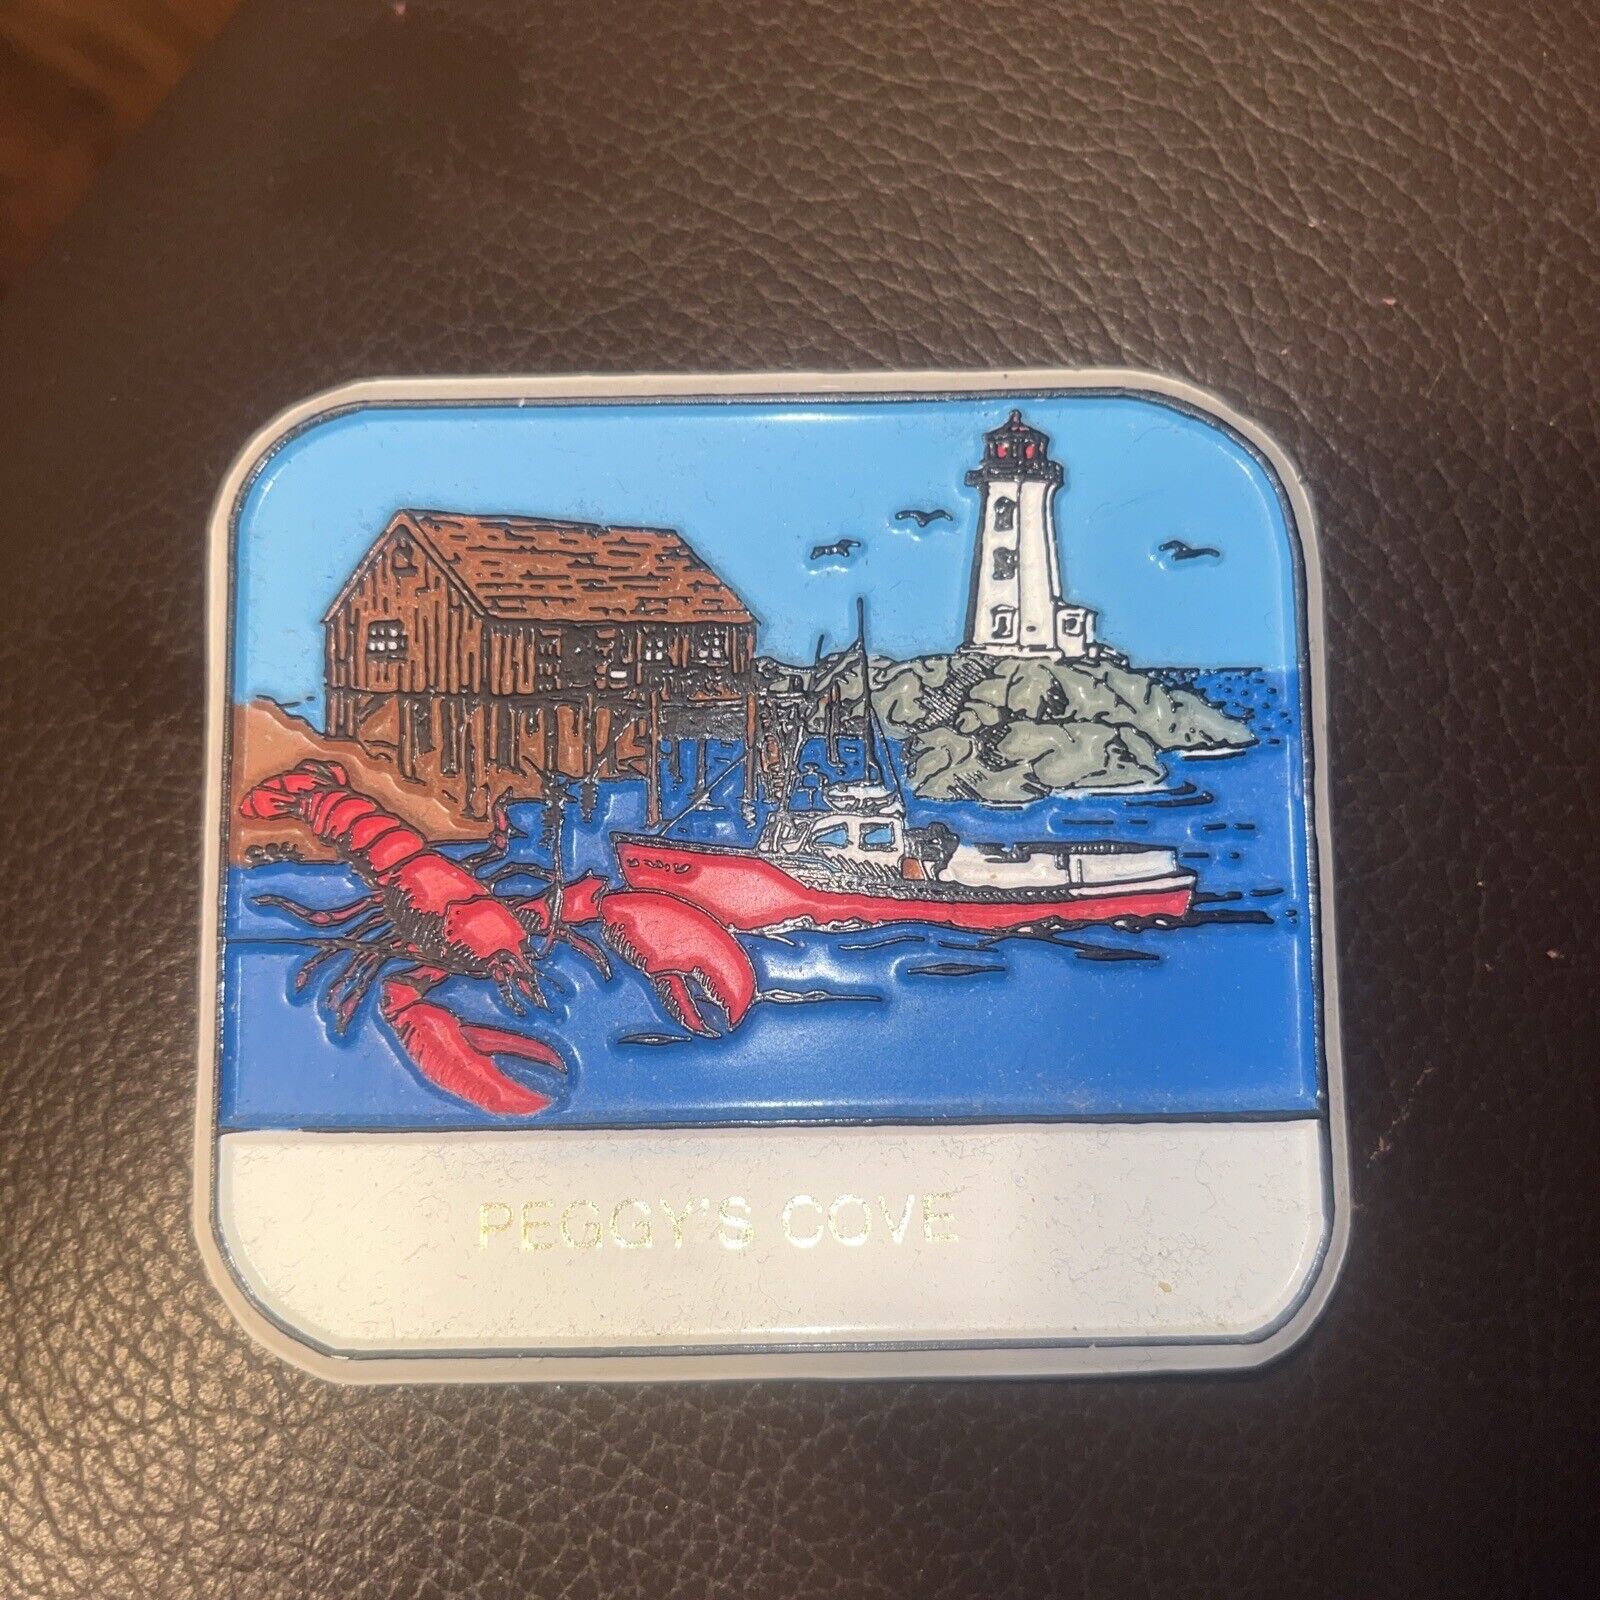 Vintage Peggy's Cove N.S. rubber magnet **USA Seller